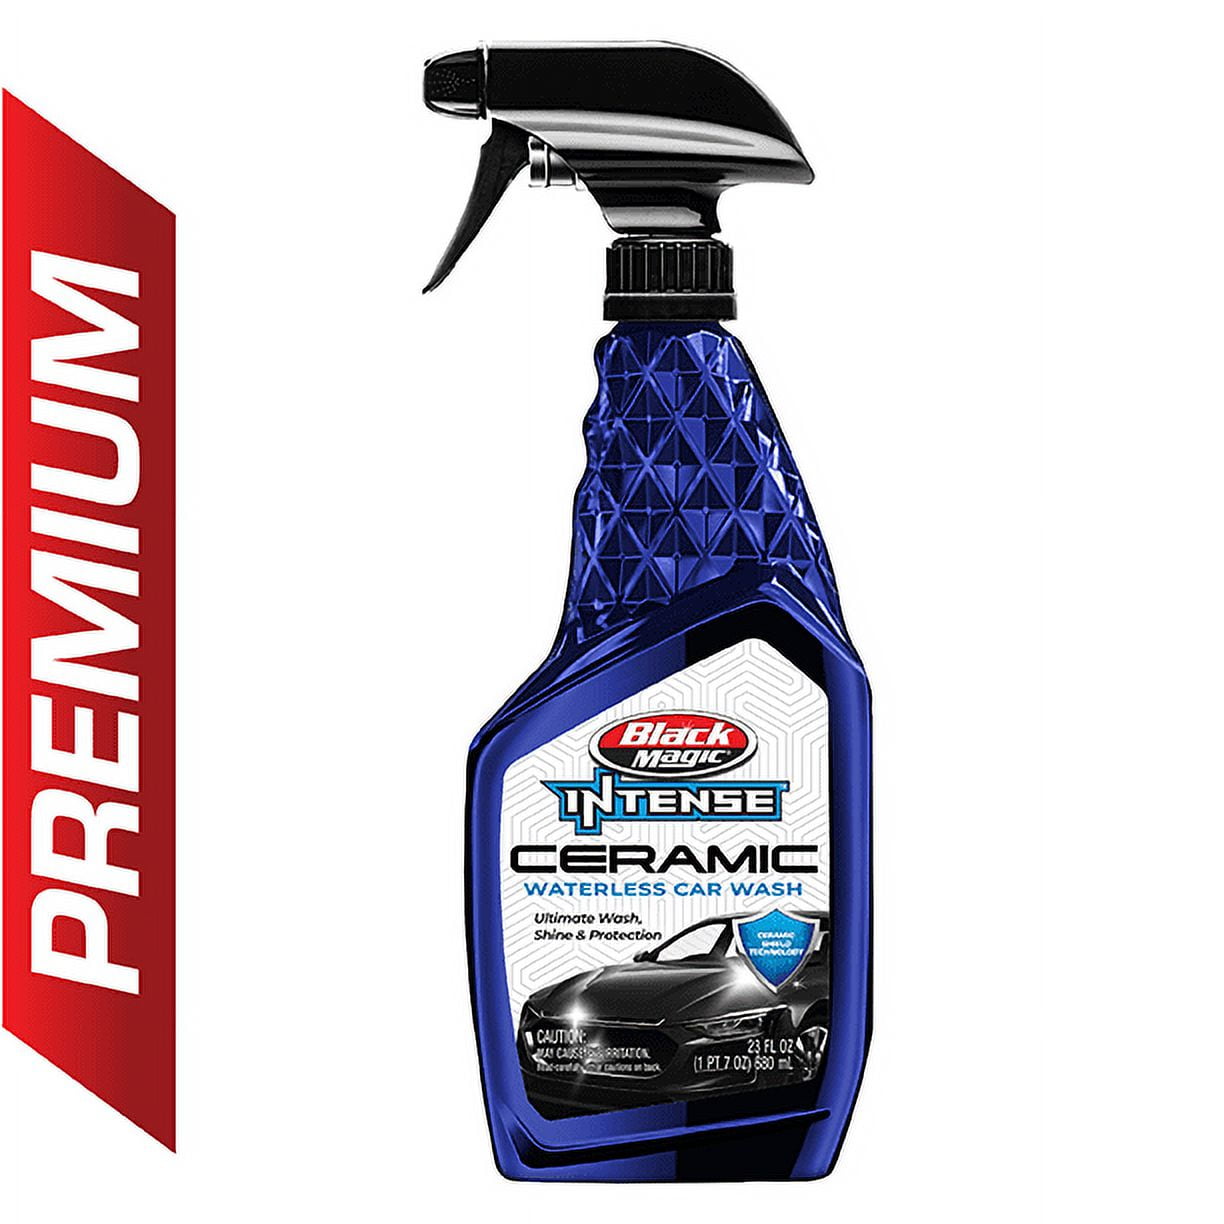 Black Magic Chrome Wheel Cleaner, Want your chrome wheels looking good  this summer? Black Magic Chrome Wheel Cleaner dissolves brake dust and road  grime instantly leaving a mirror-like